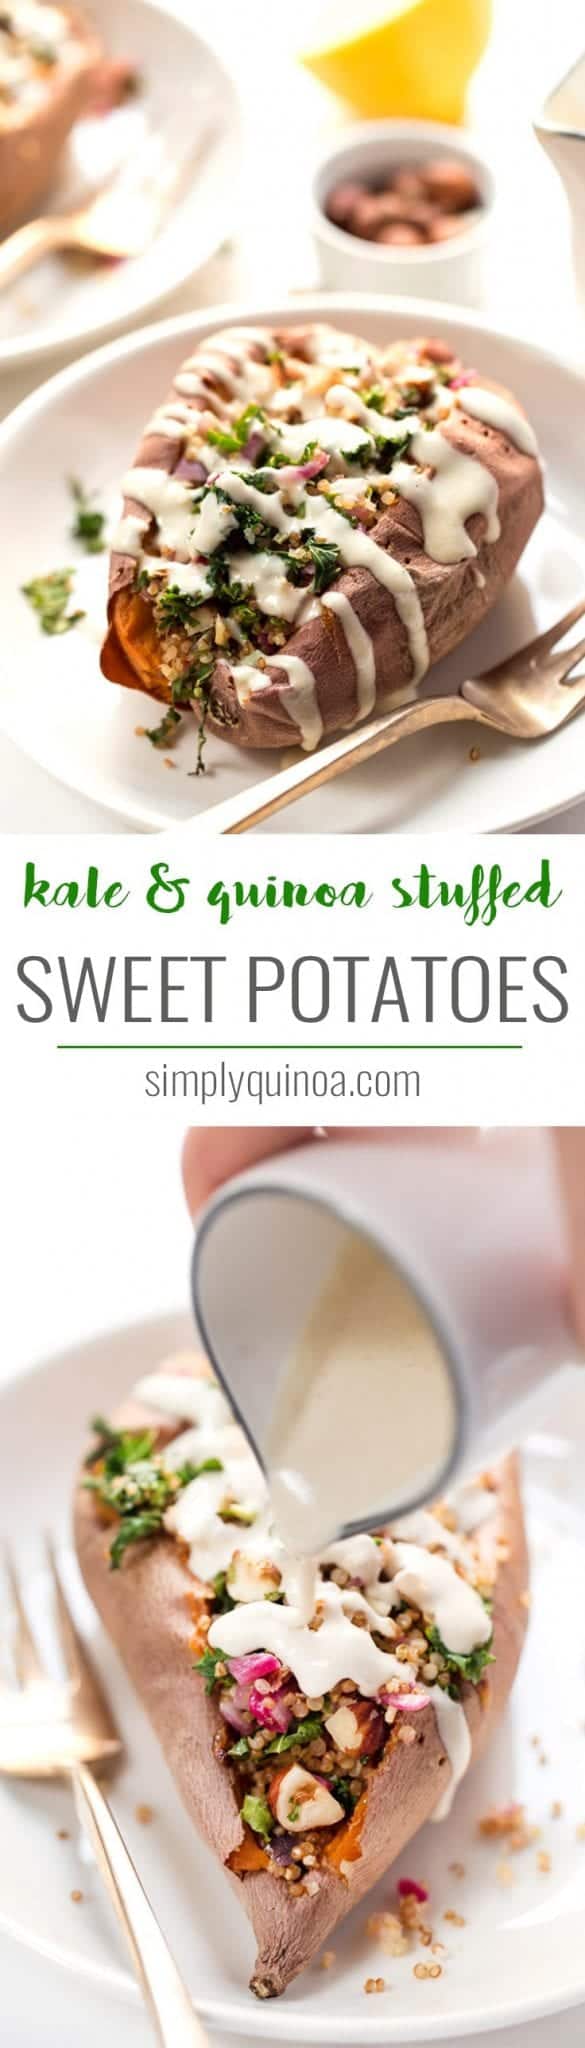 quinoa stuffed sweet potatoes with kale for pinterest